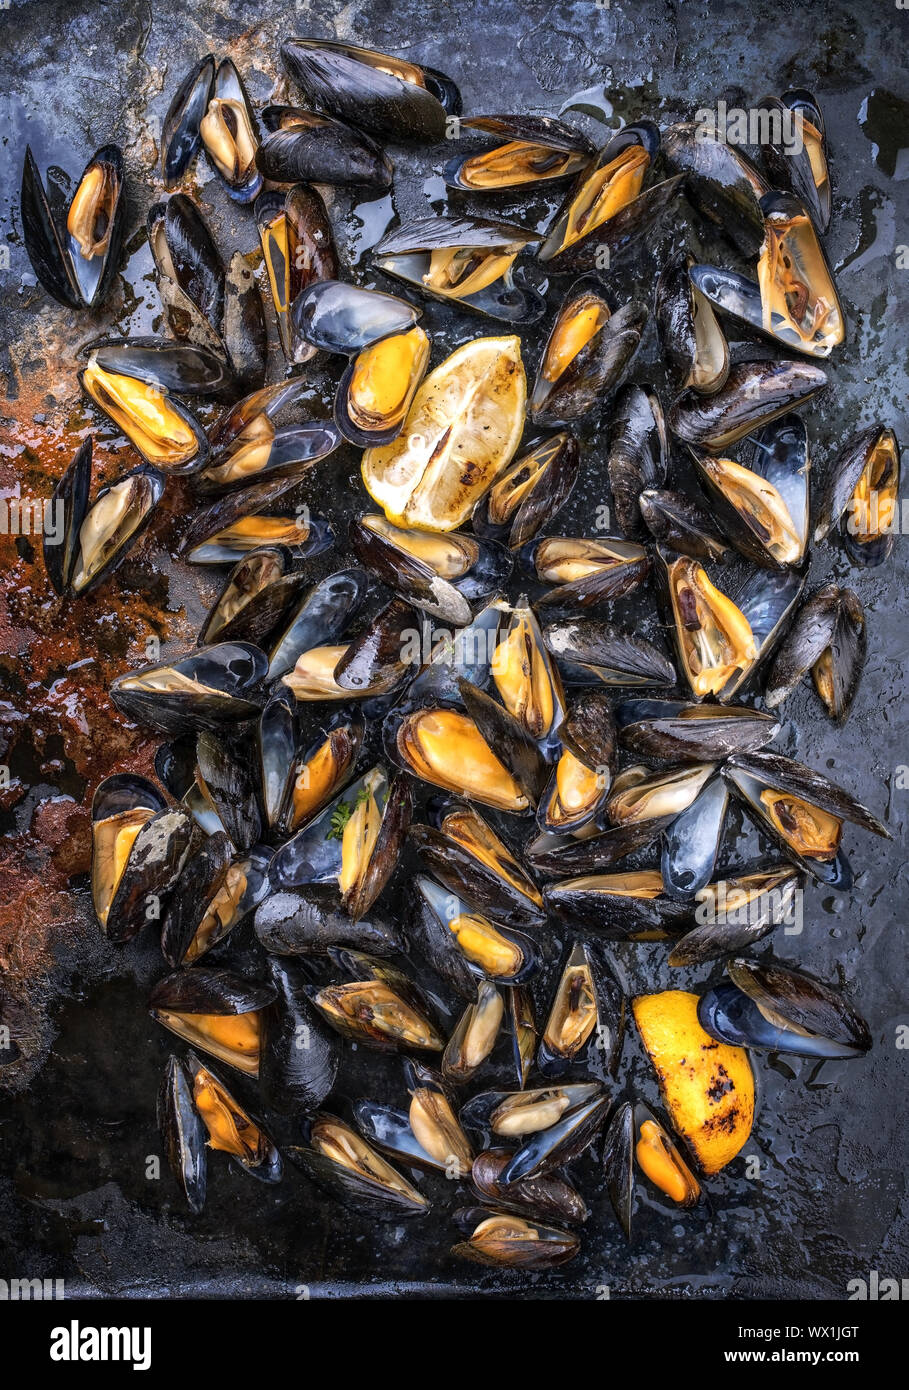 Traditional barbecue Italian blue mussel as top view on a metal sheet Stock Photo